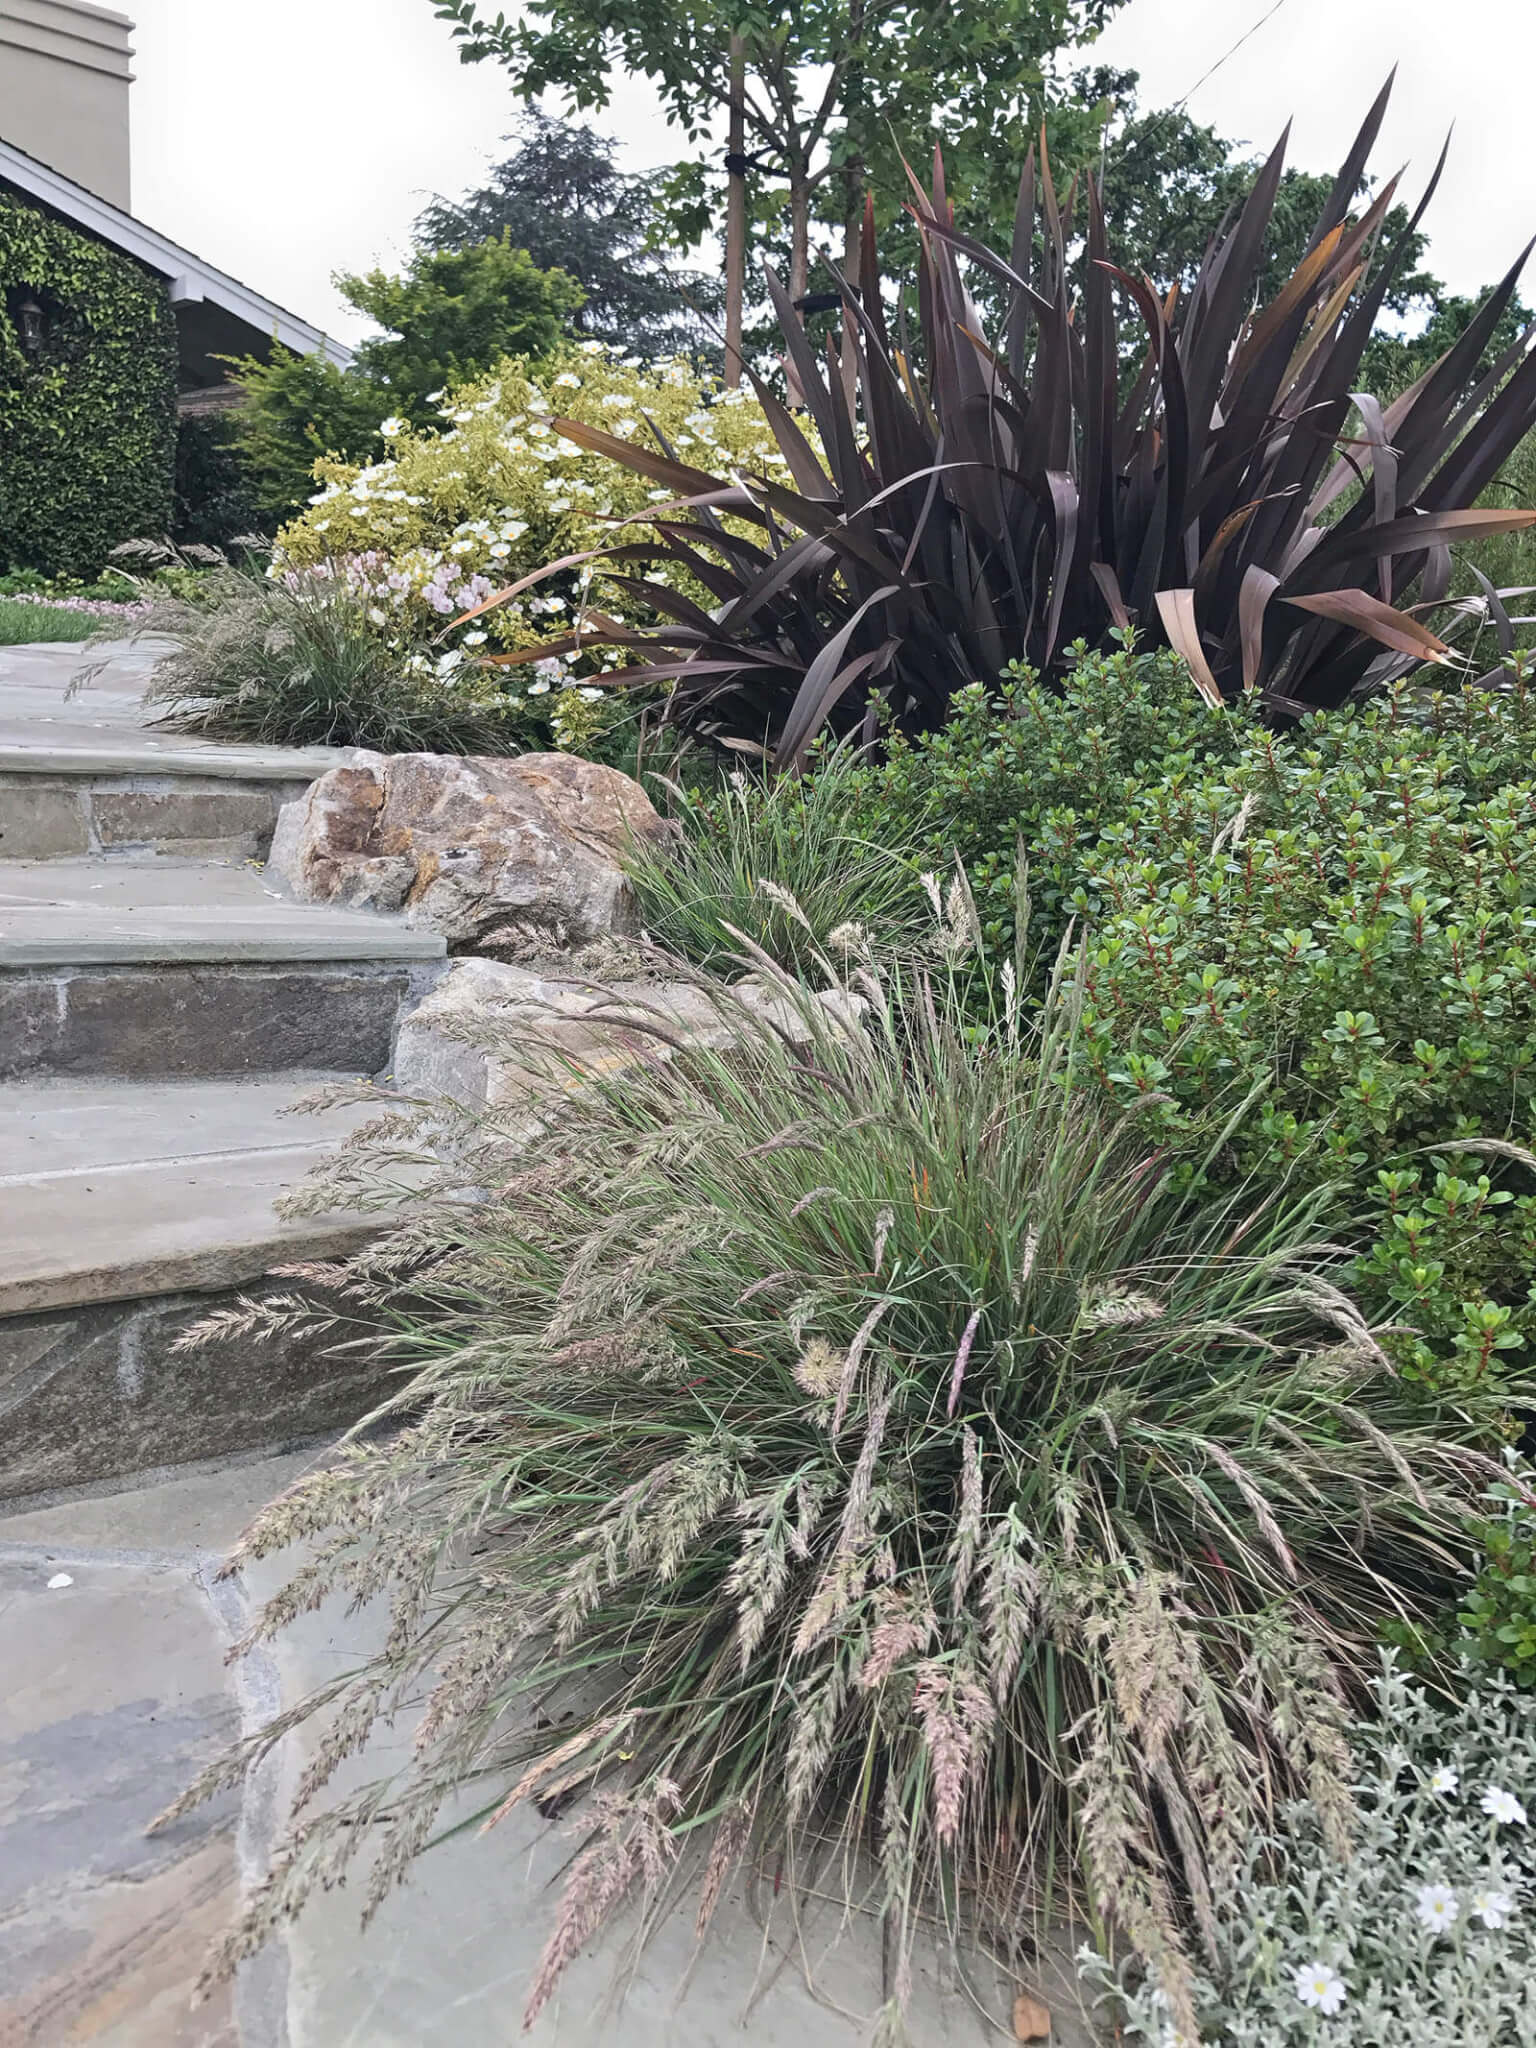 Stone tile walkway with purple cordyline and tall ornamental grass